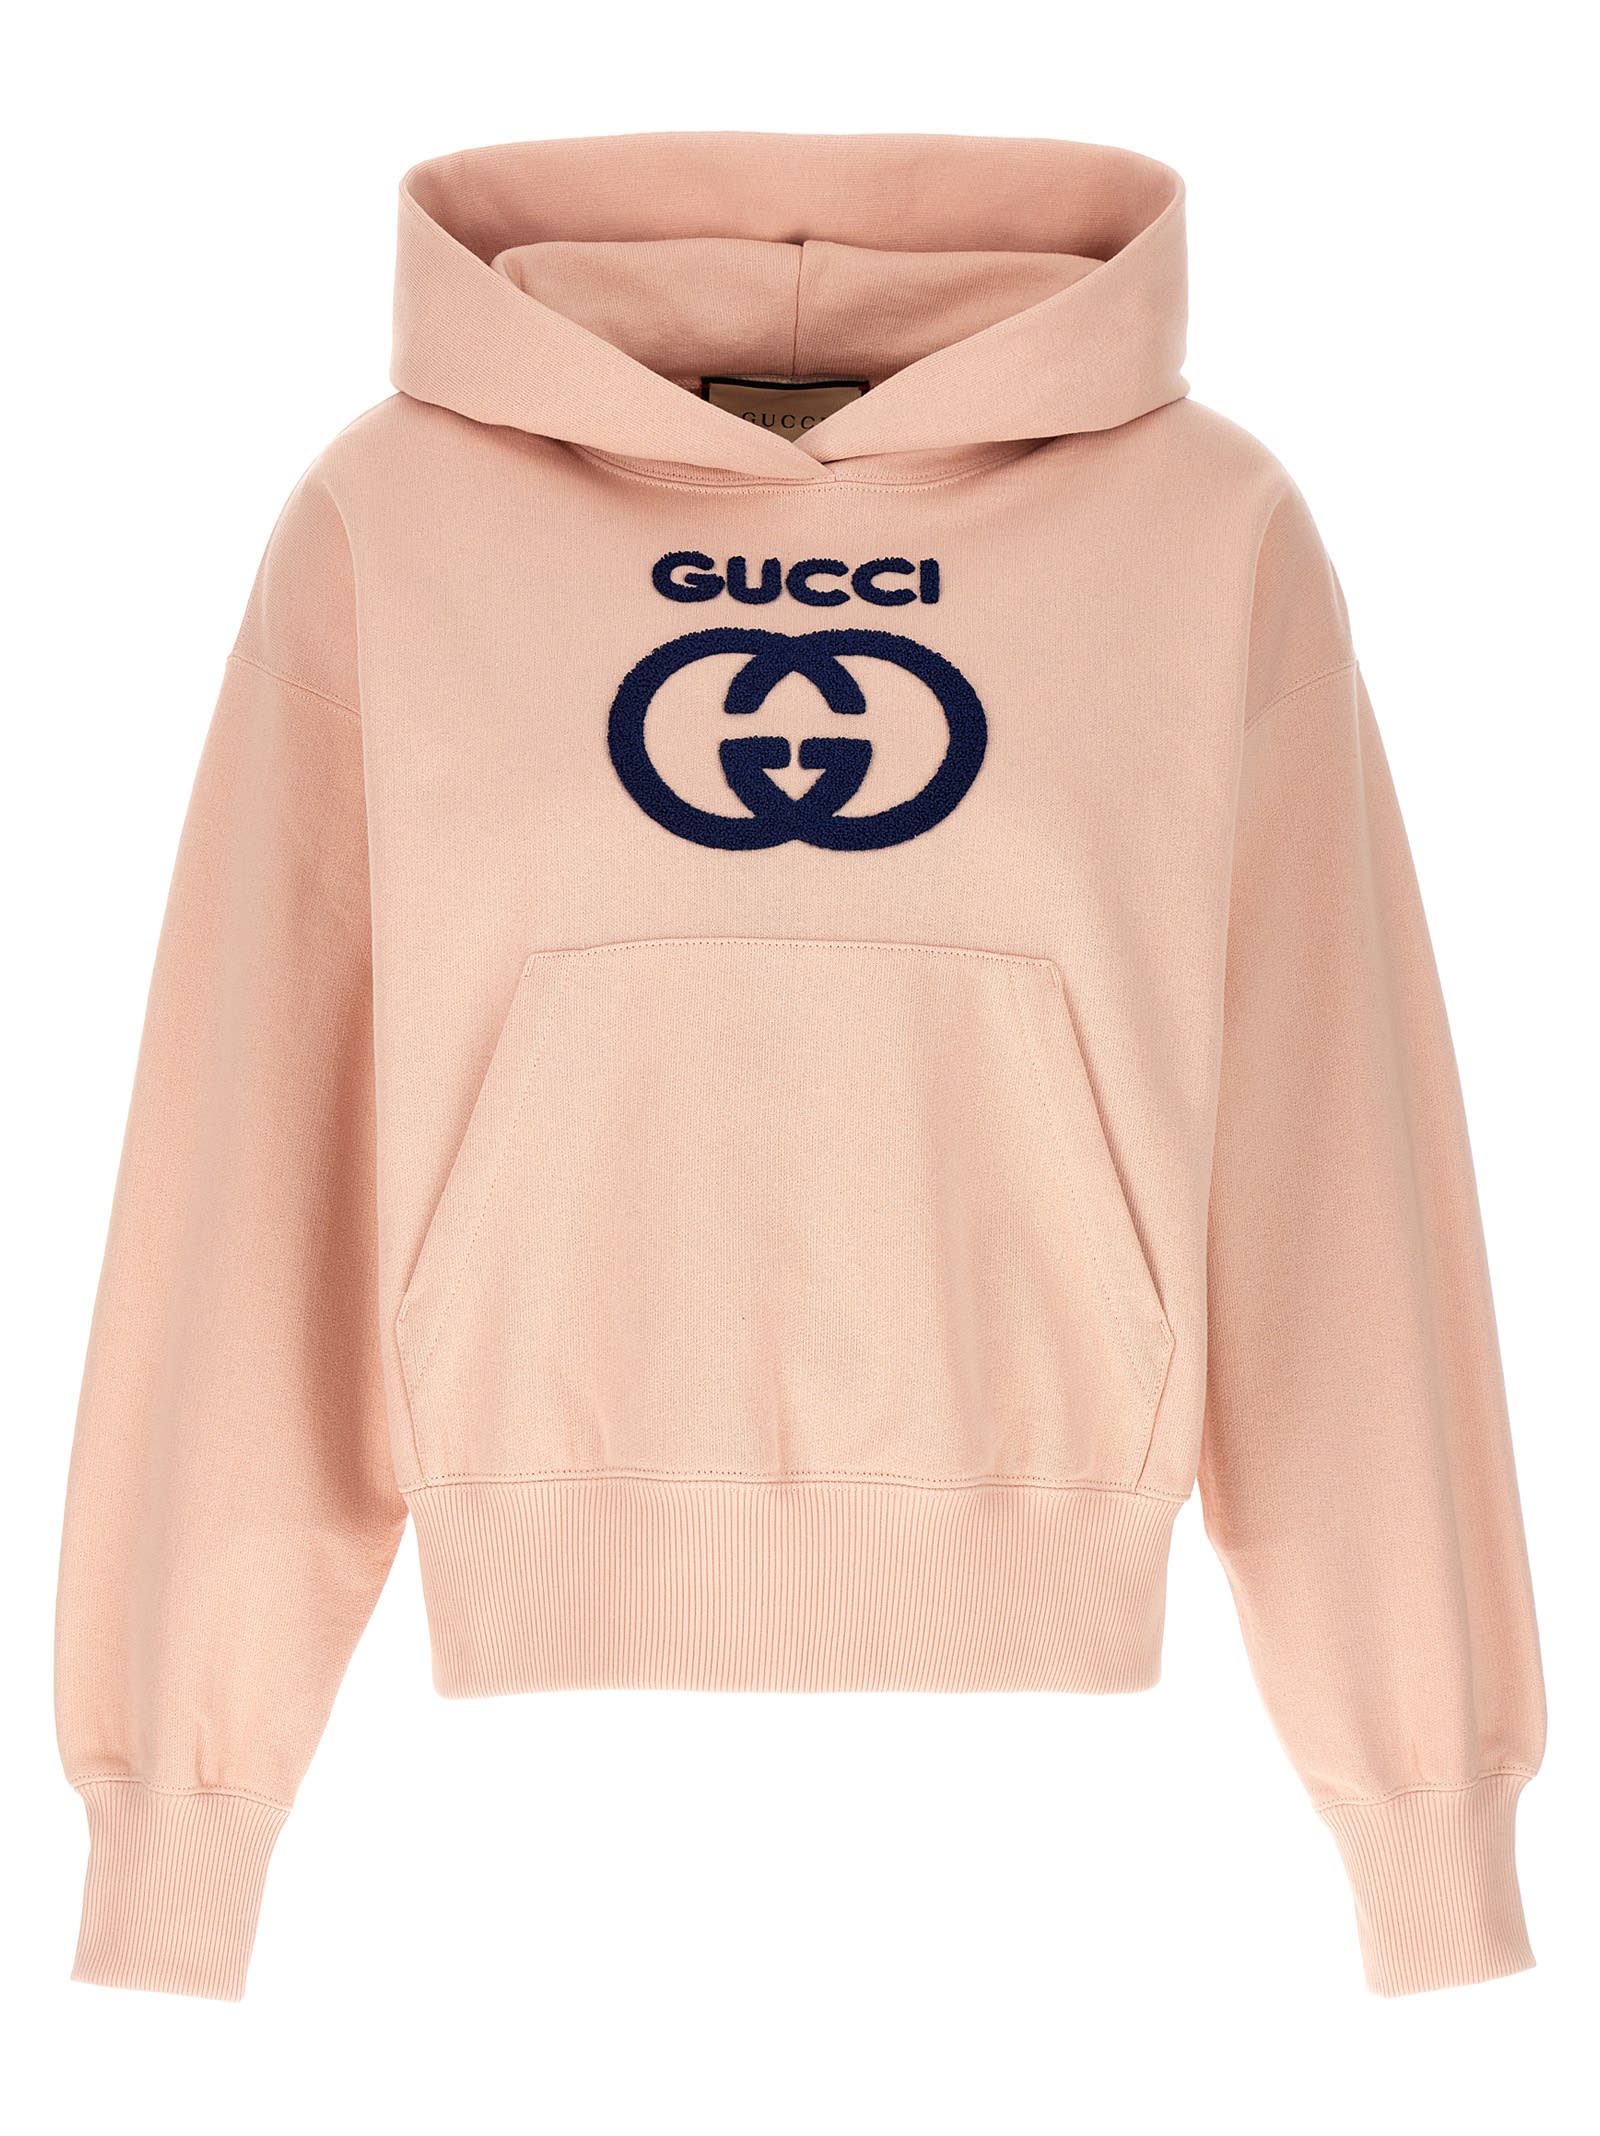 Gucci Logo Hoodie In Pink